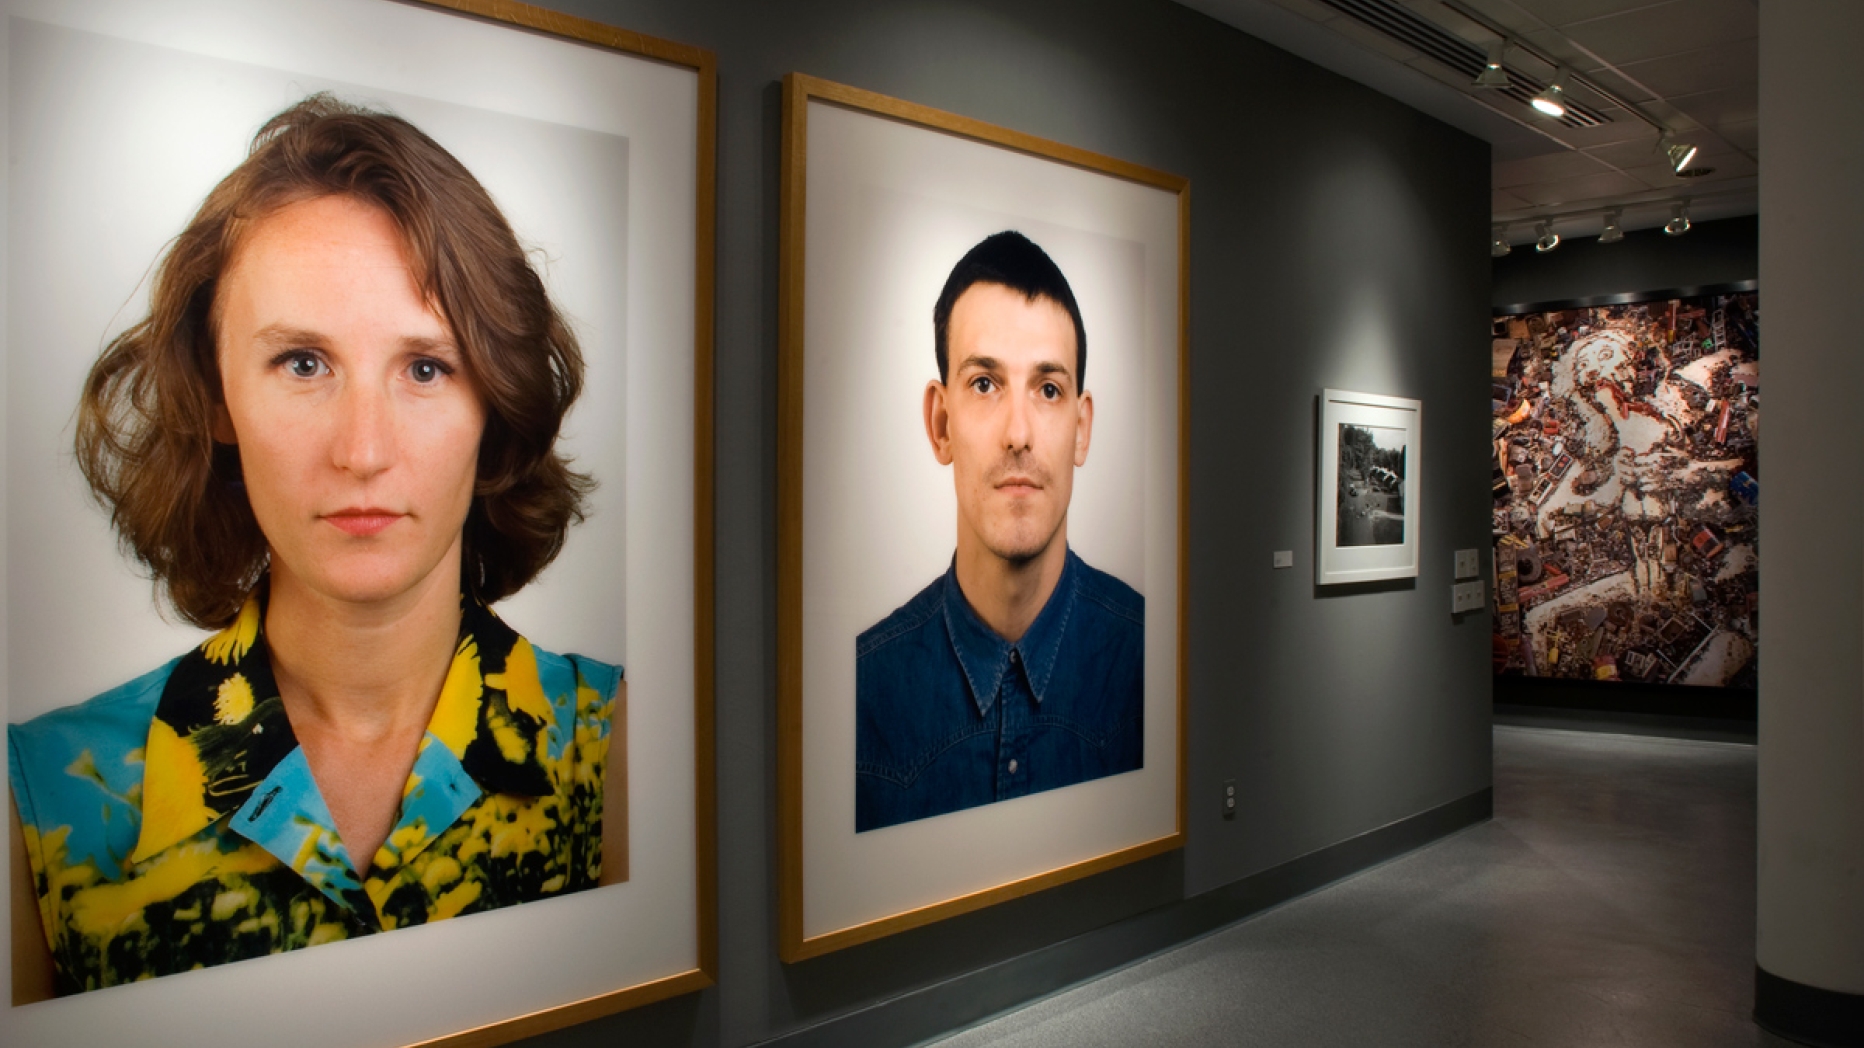 Gallery display of photographs. Most notable pieces are large portraits of a woman and a man.